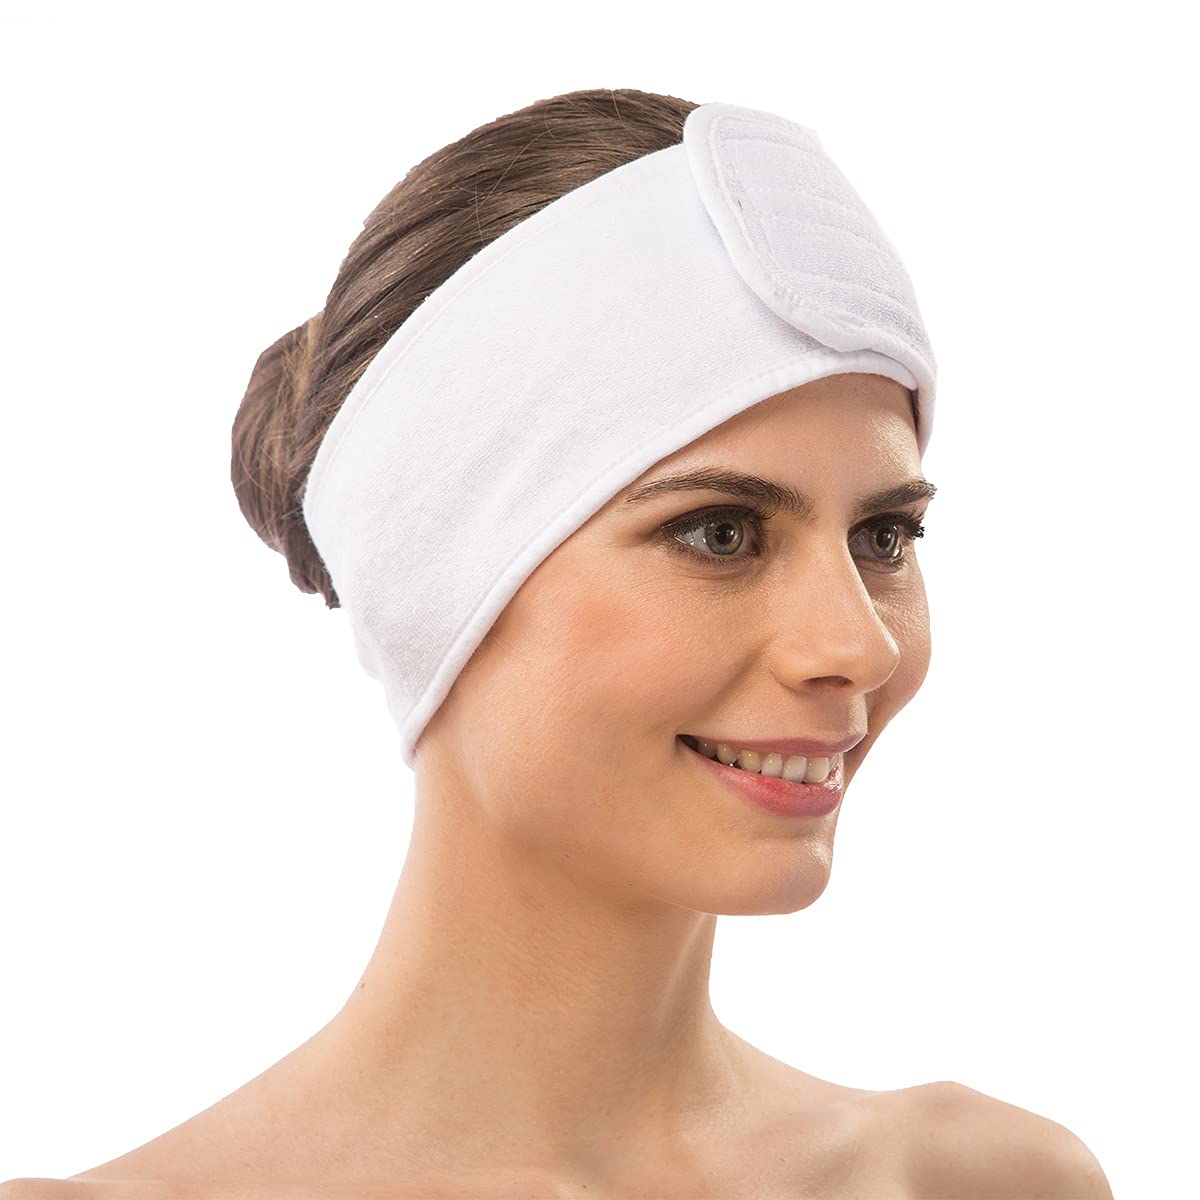 APPEARUS Spa Facial Headband Head Wrap Terry Cloth Headbands Stretch Towel  with Closure for Bath Makeup and Sport (4 Count/White)